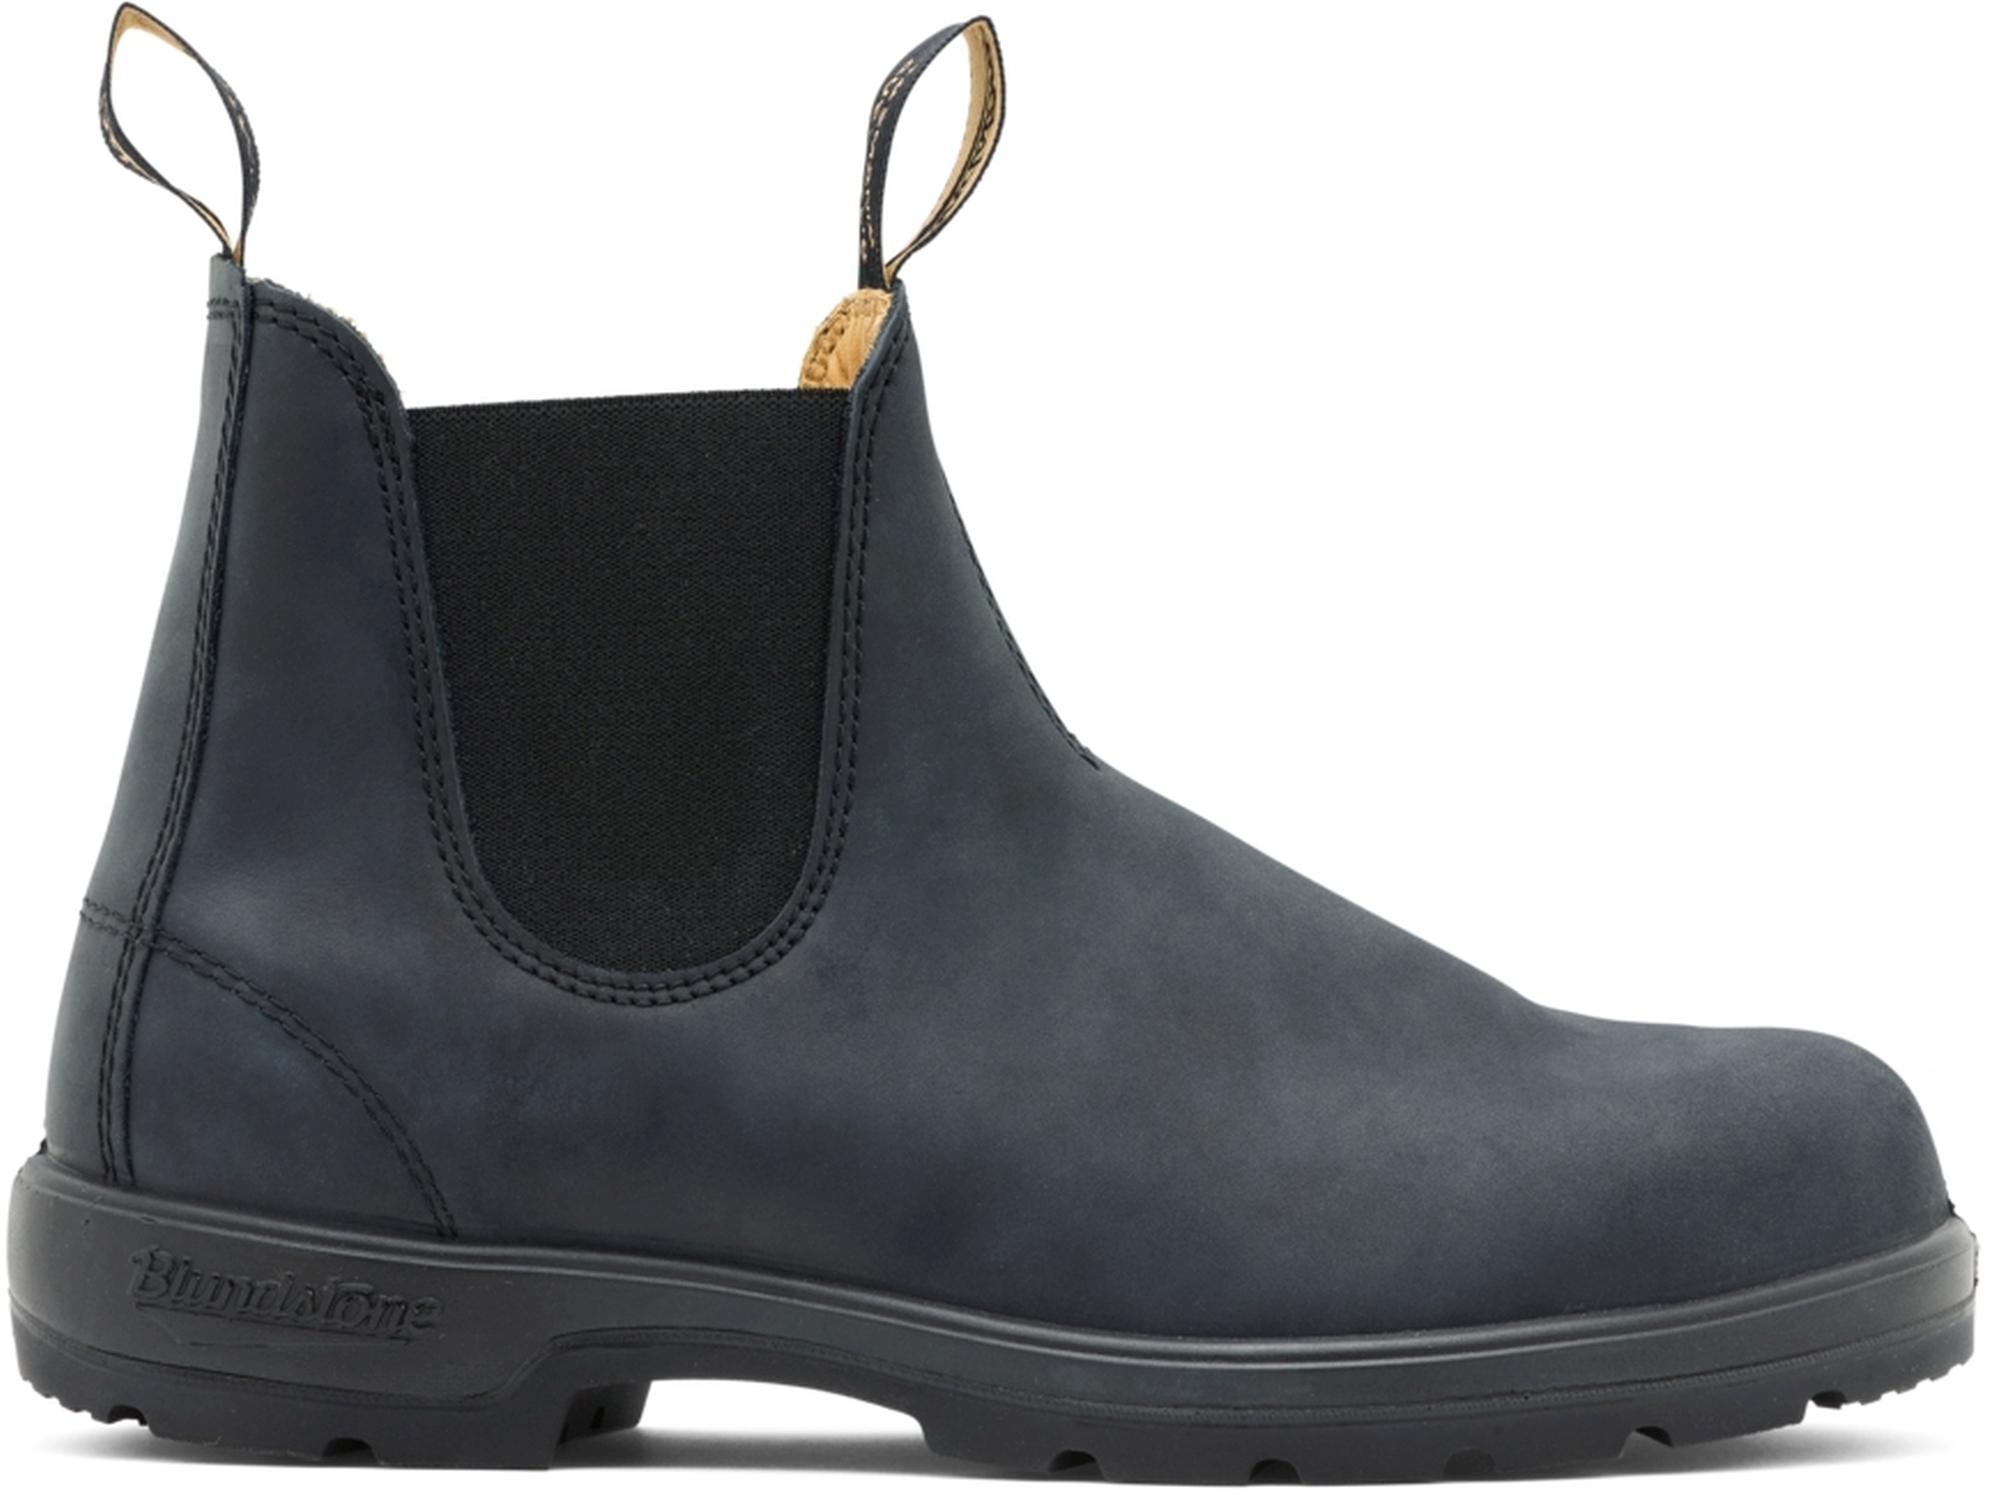 Blundstone 587 Rustic Black Leather (550 Series) Calf leather